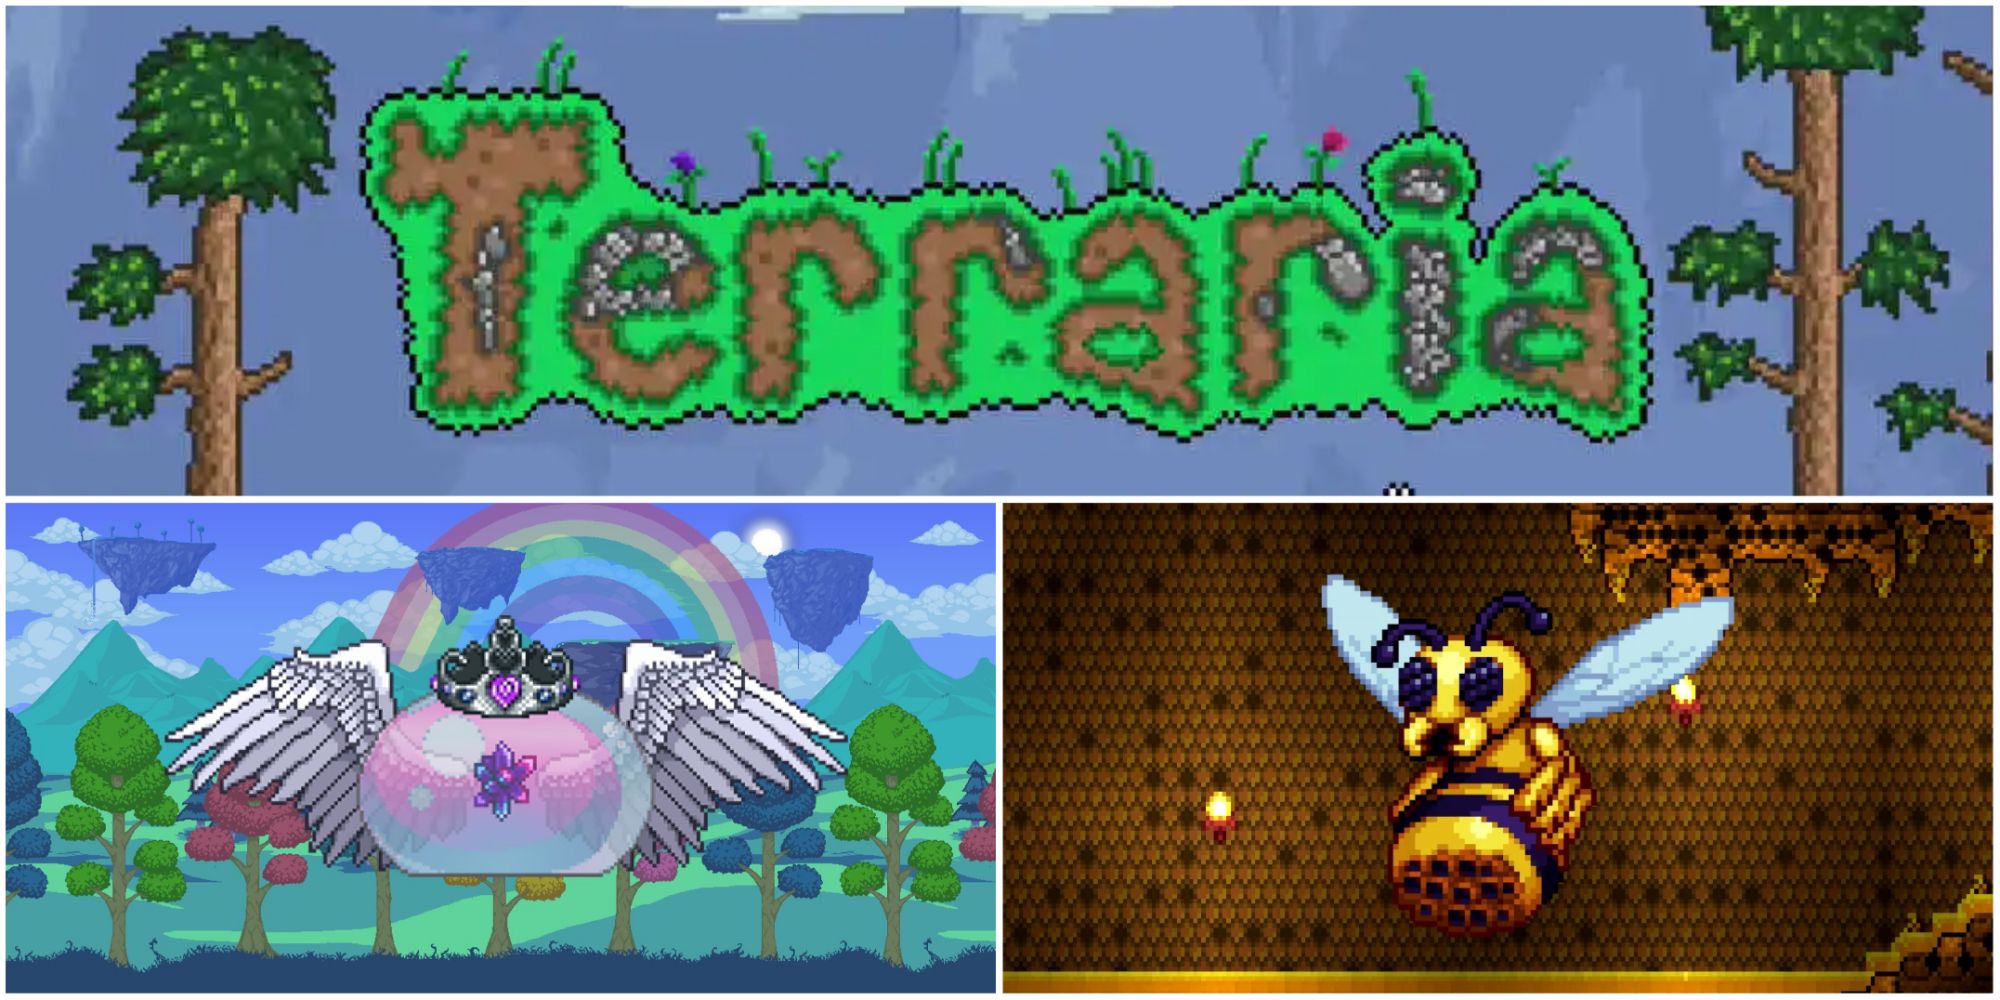 Game Terraria 5 Difficulty of All Bosses Tier List vintage Art